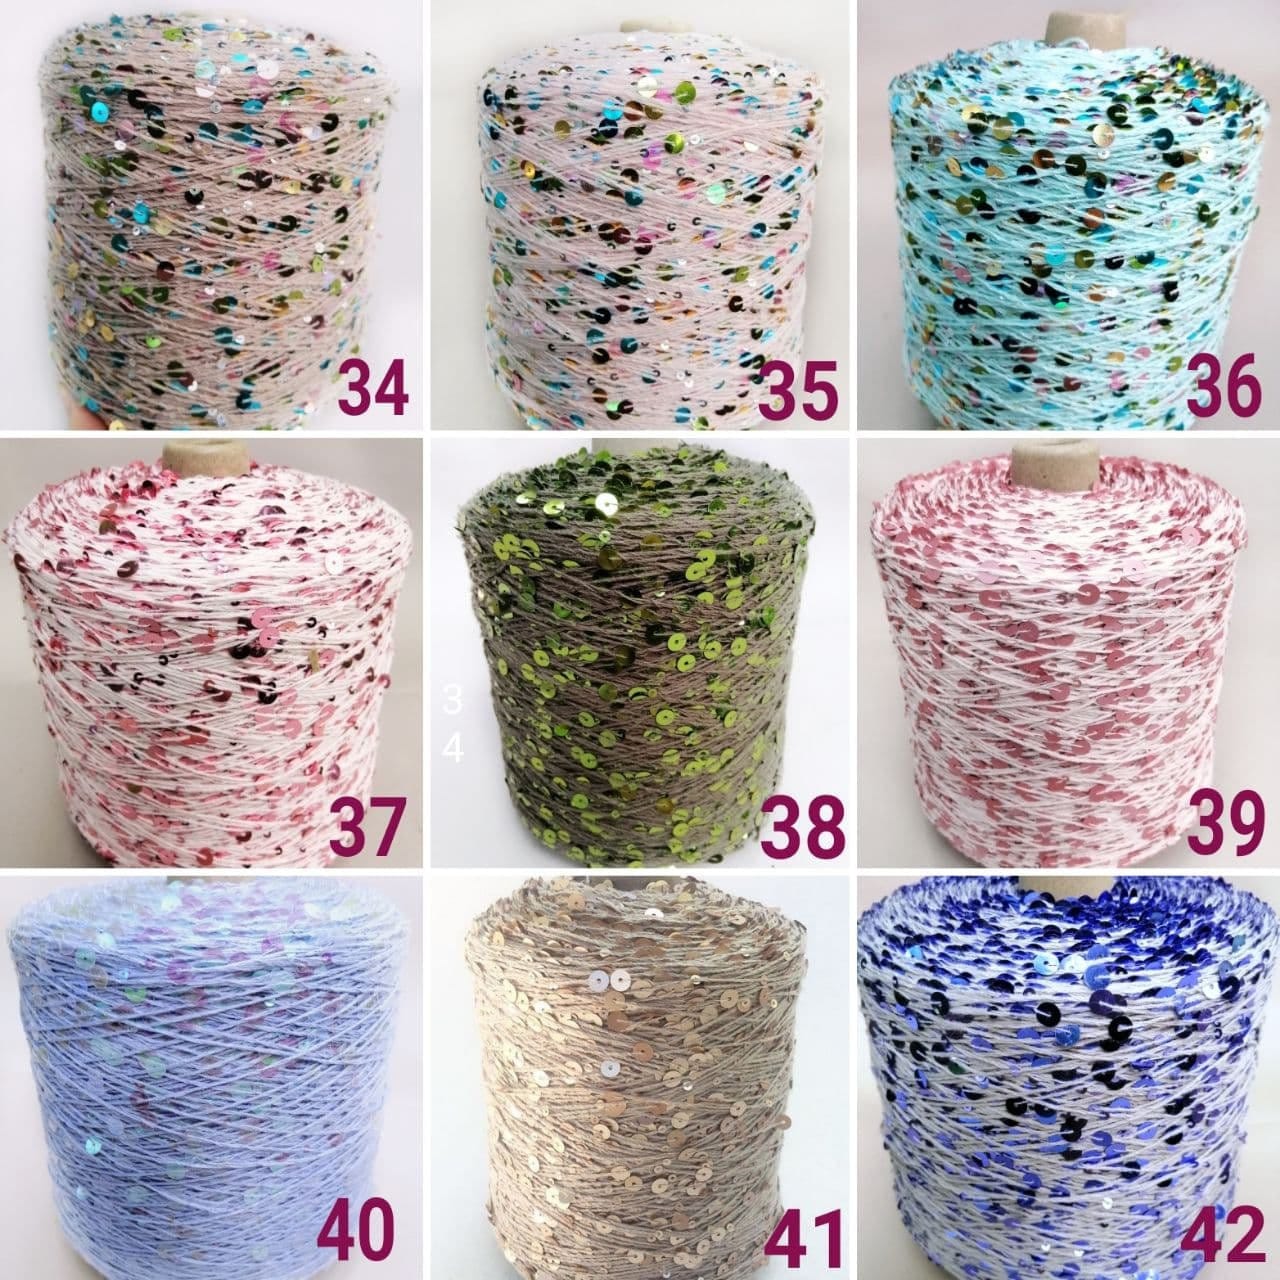 New 2022 Yarn Knitting Baby Yarn 100% Cotton Crochet Embroidery Soft Crafts  Natural Milk Colorful Quality Hobby Hot Sale - AliExpress